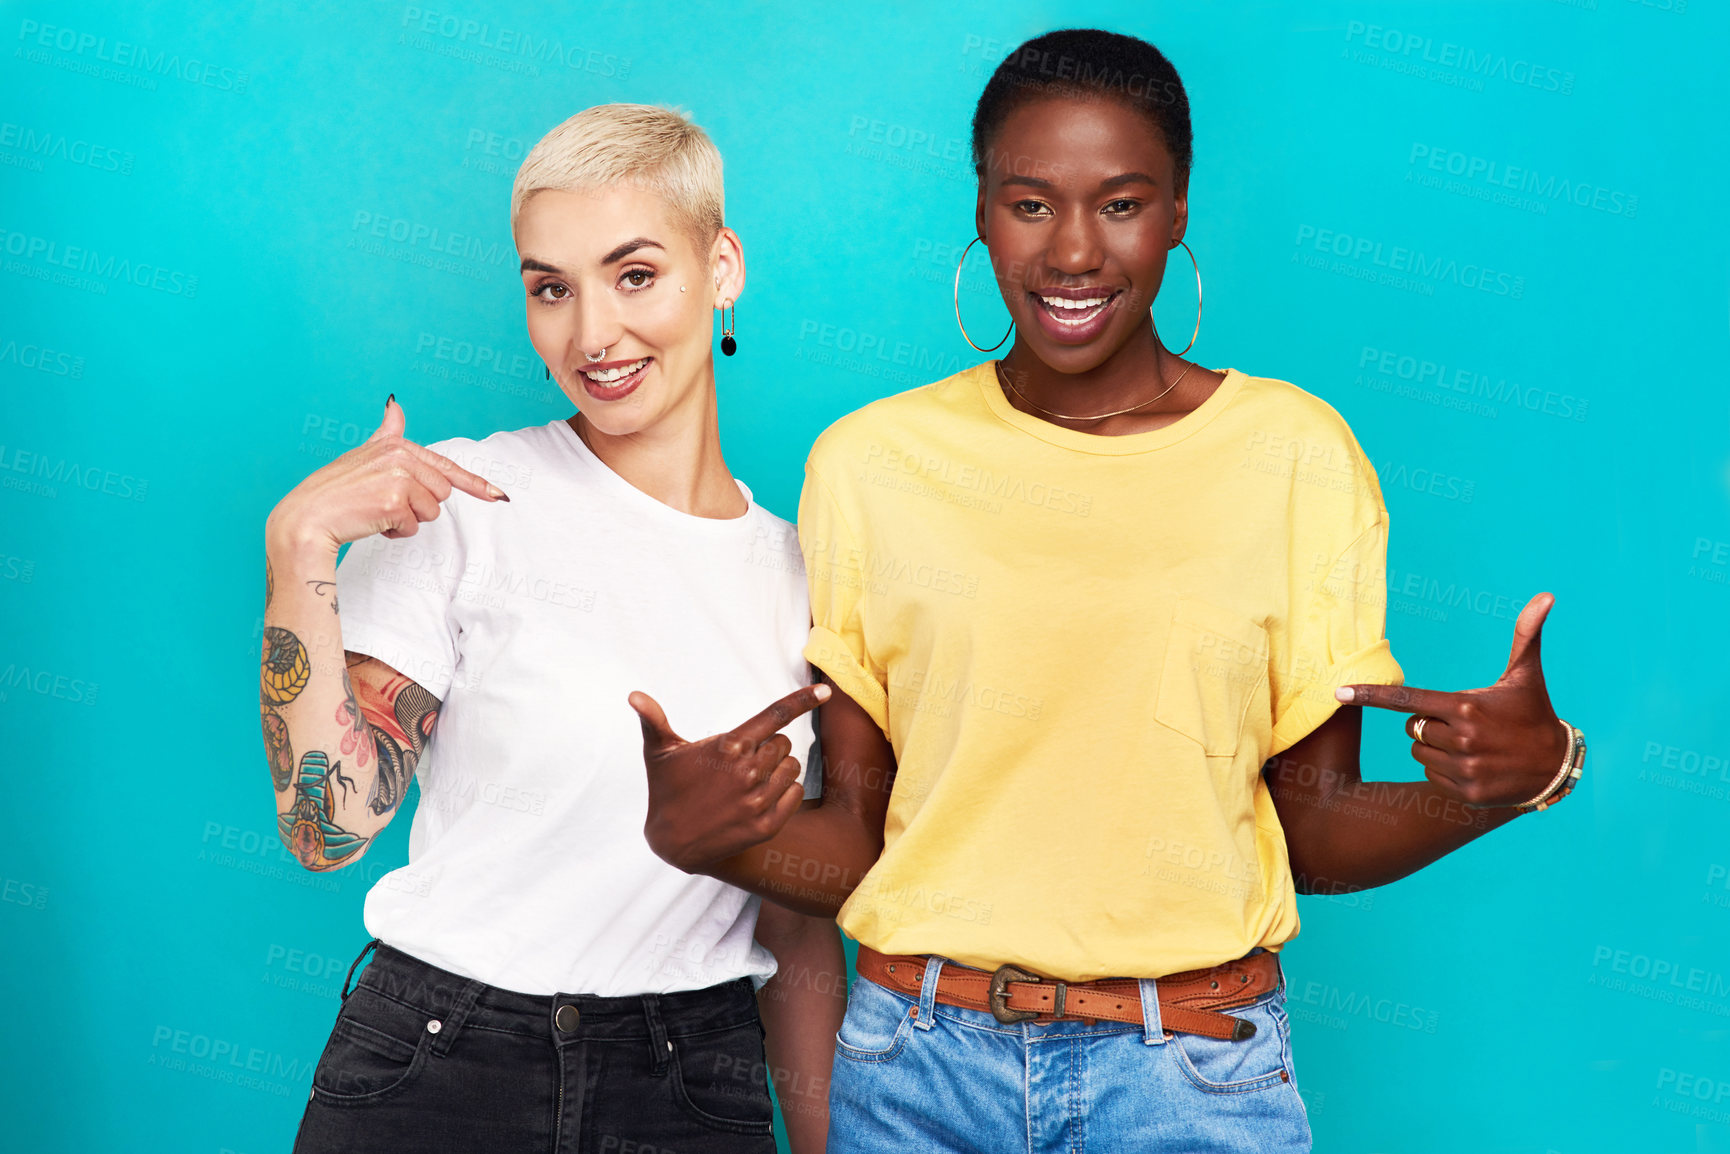 Buy stock photo Studio shot of two confident young women pointing at their t shirts against a turquoise background